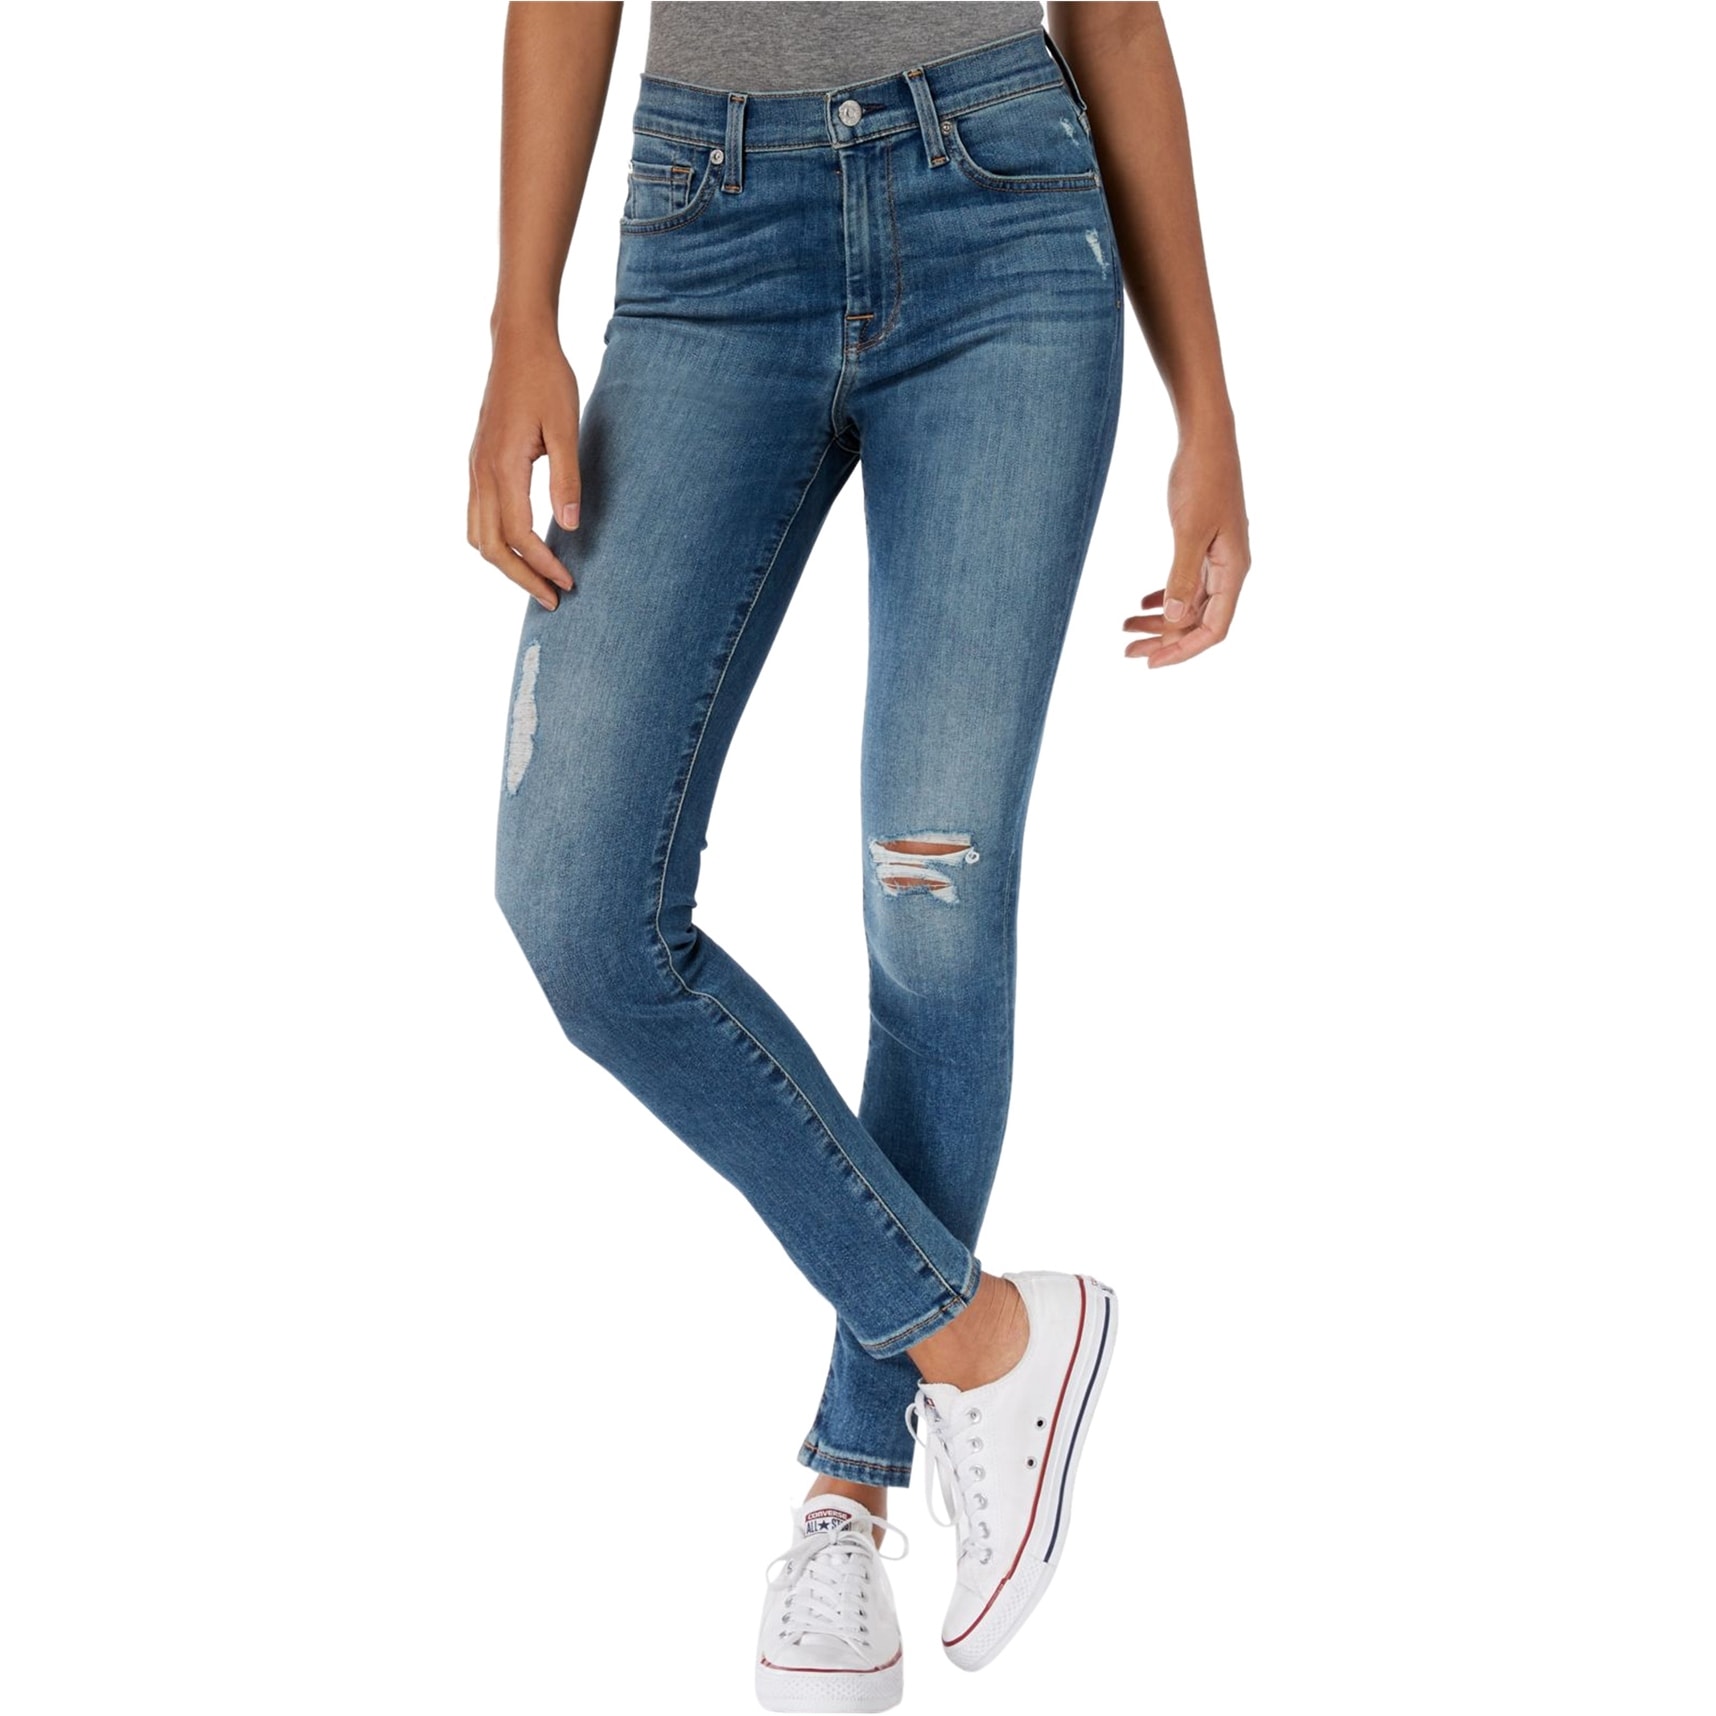 ankle fit jeans for ladies